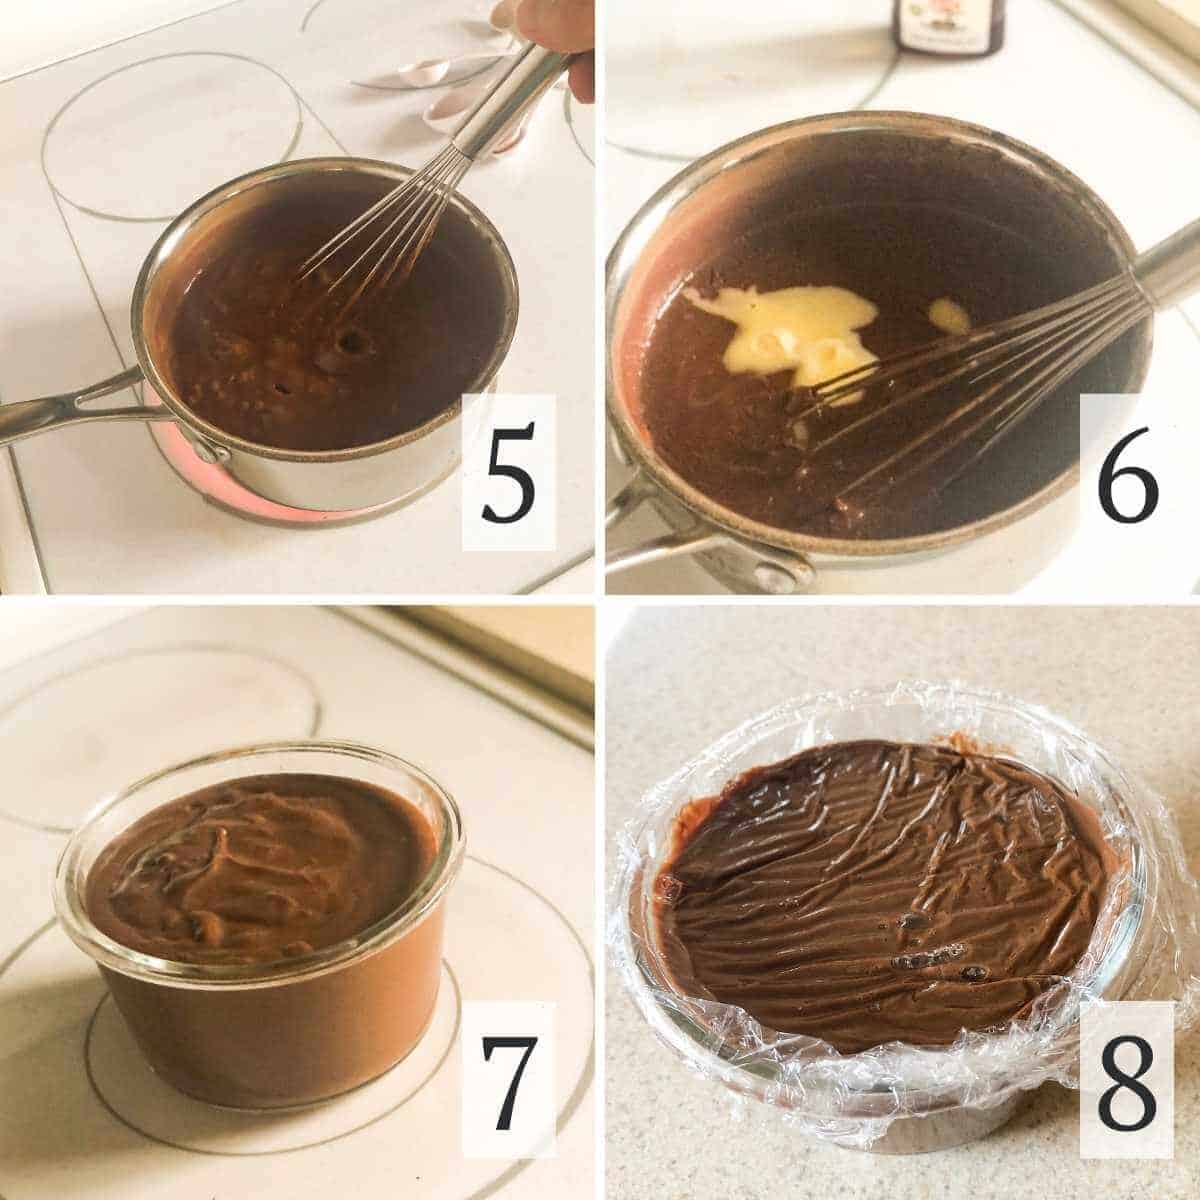 Steps 5 through 8 for making oat milk chocolate pudding